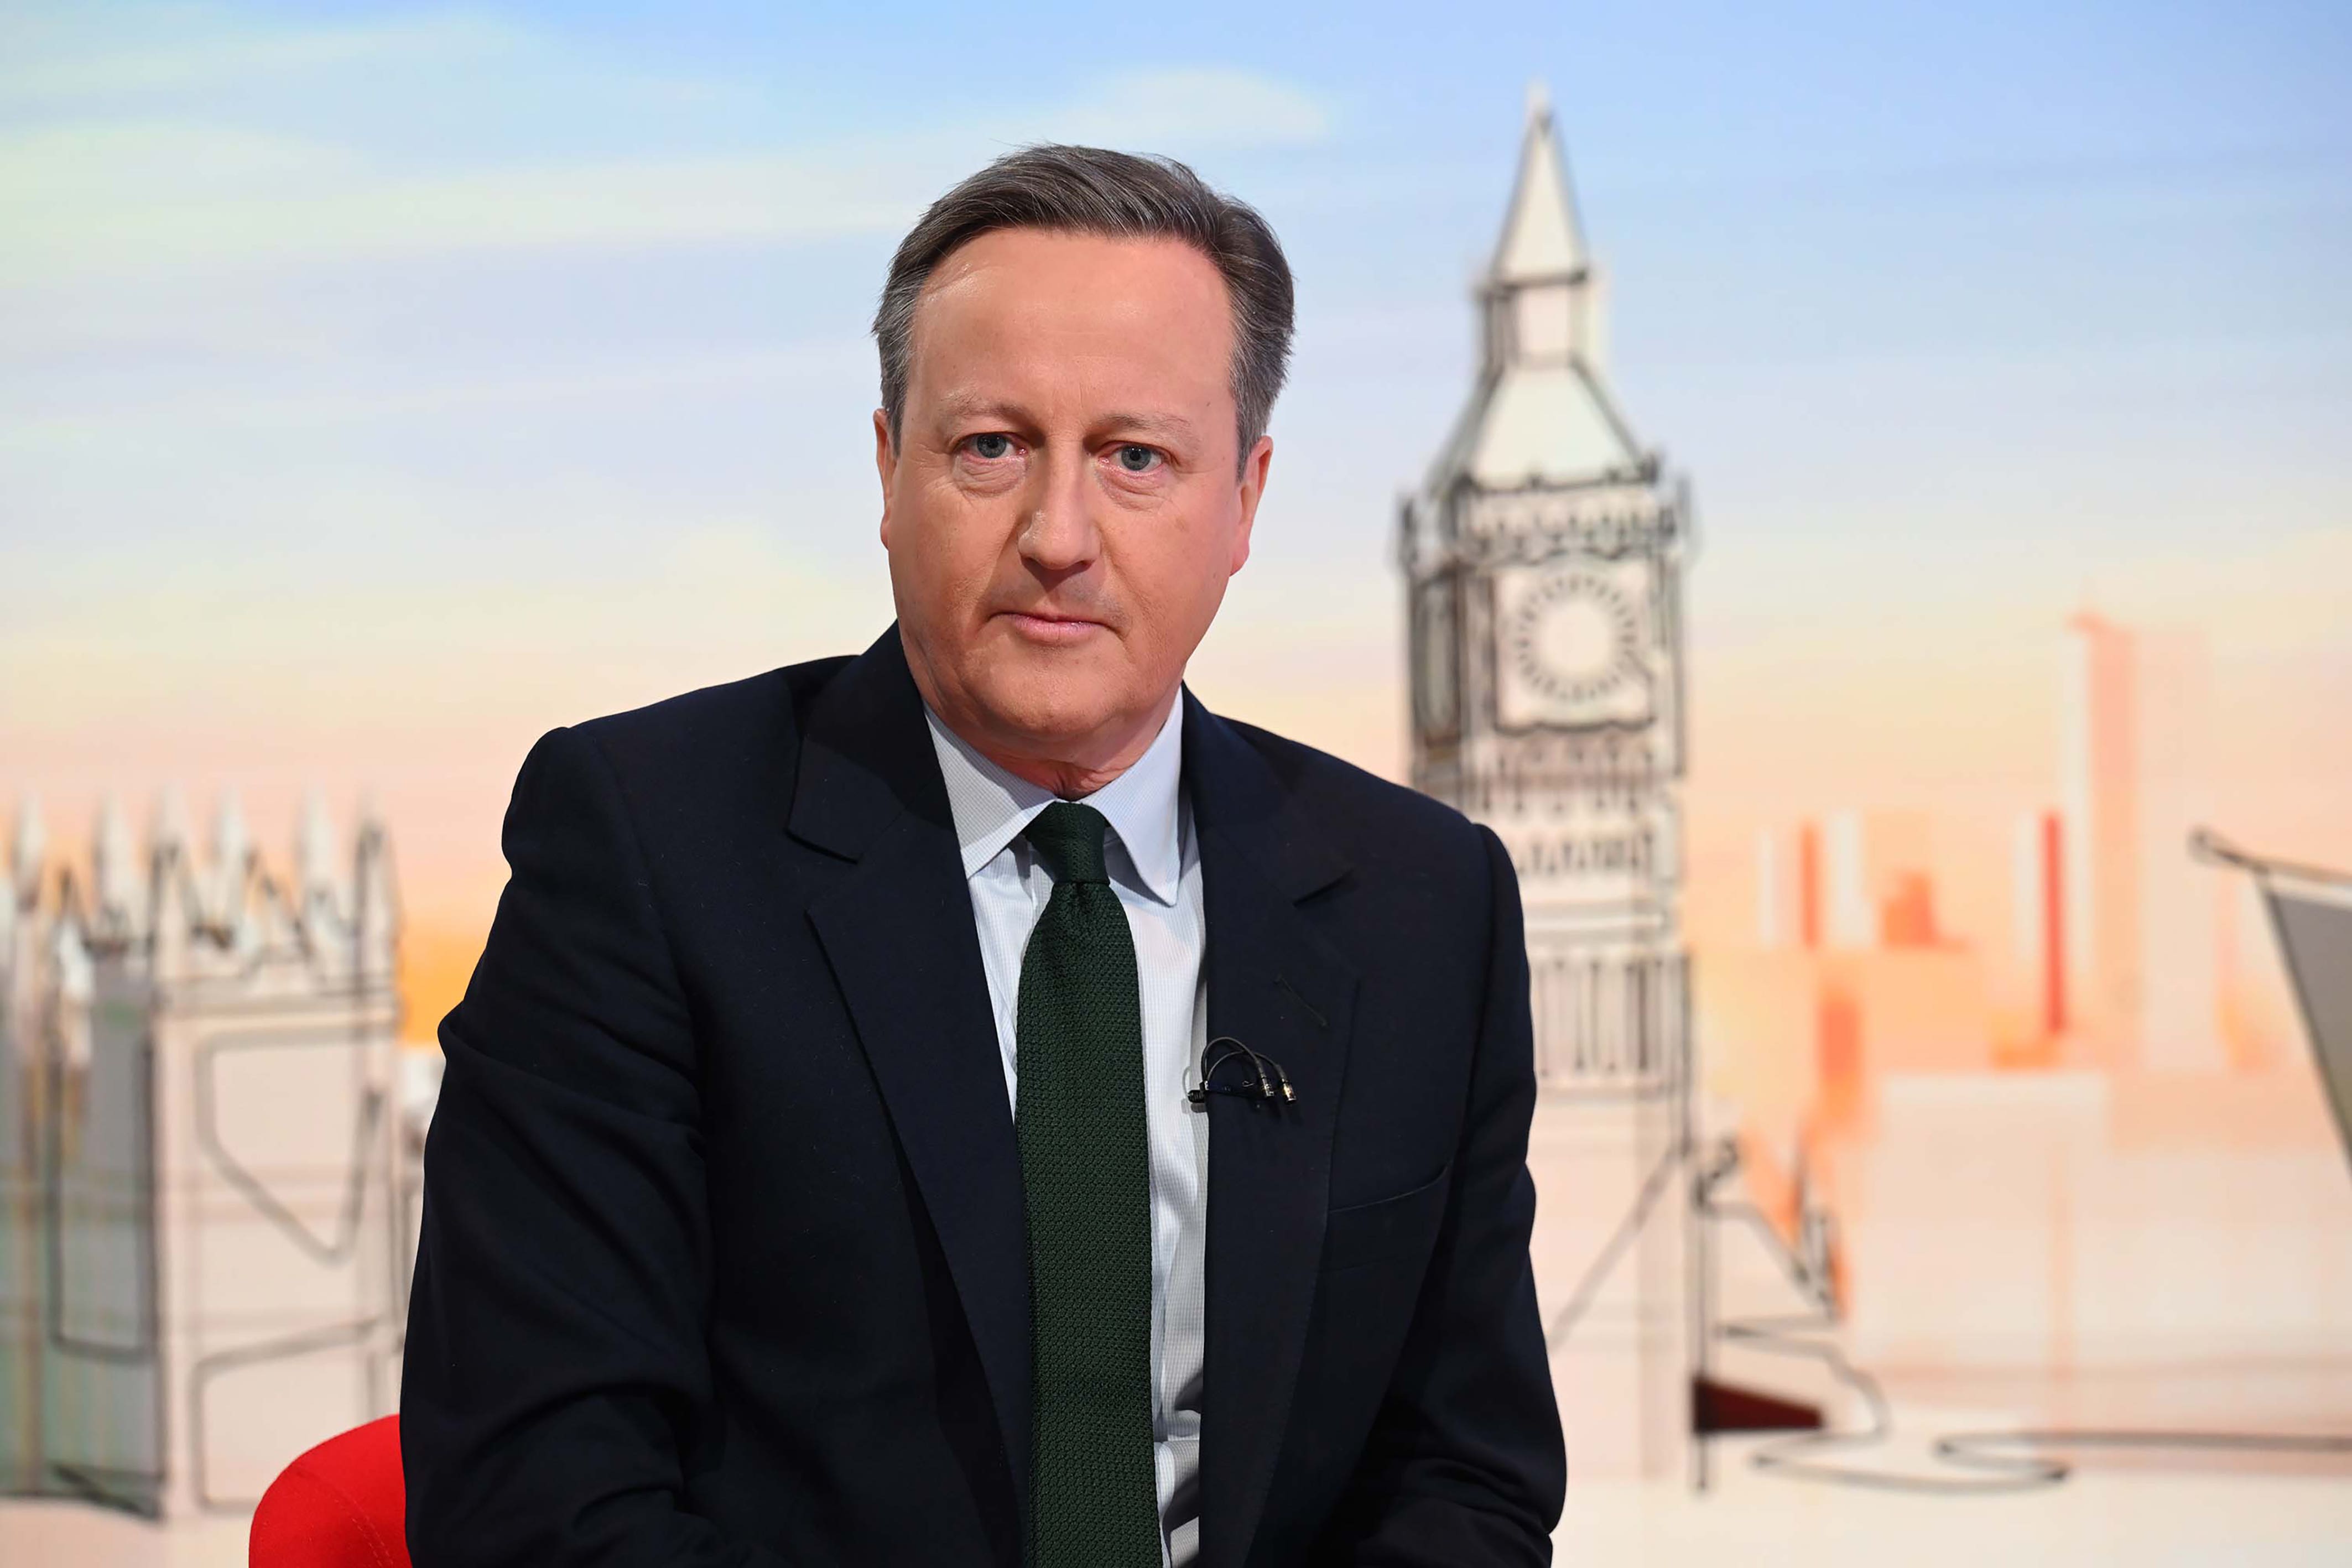 For use in UK, Ireland or Benelux countries only BBC handout photo of Foreign Secretary Lord David Cameron appearing on the BBC1 current affairs programme, Sunday with Laura Kuenssberg (Jeff Overs/BBC/PA)